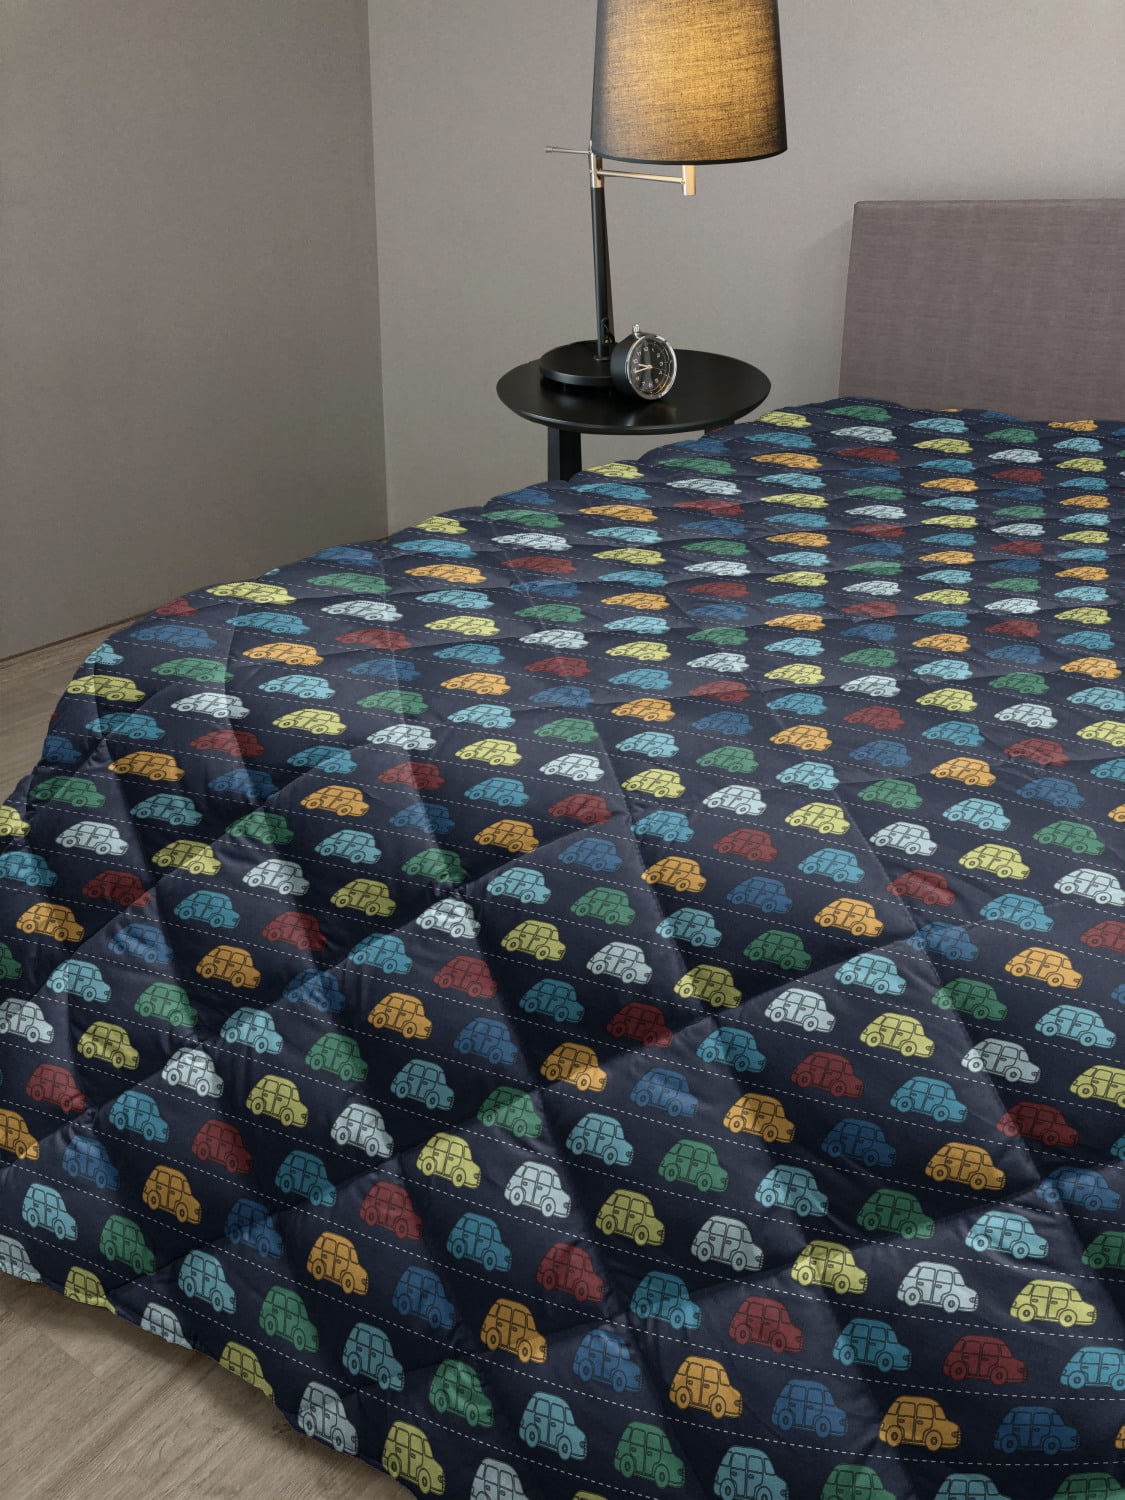 Details about   Ambesonne Absurd Pattern Flat Sheet Top Sheet Decorative Bedding 6 Sizes 